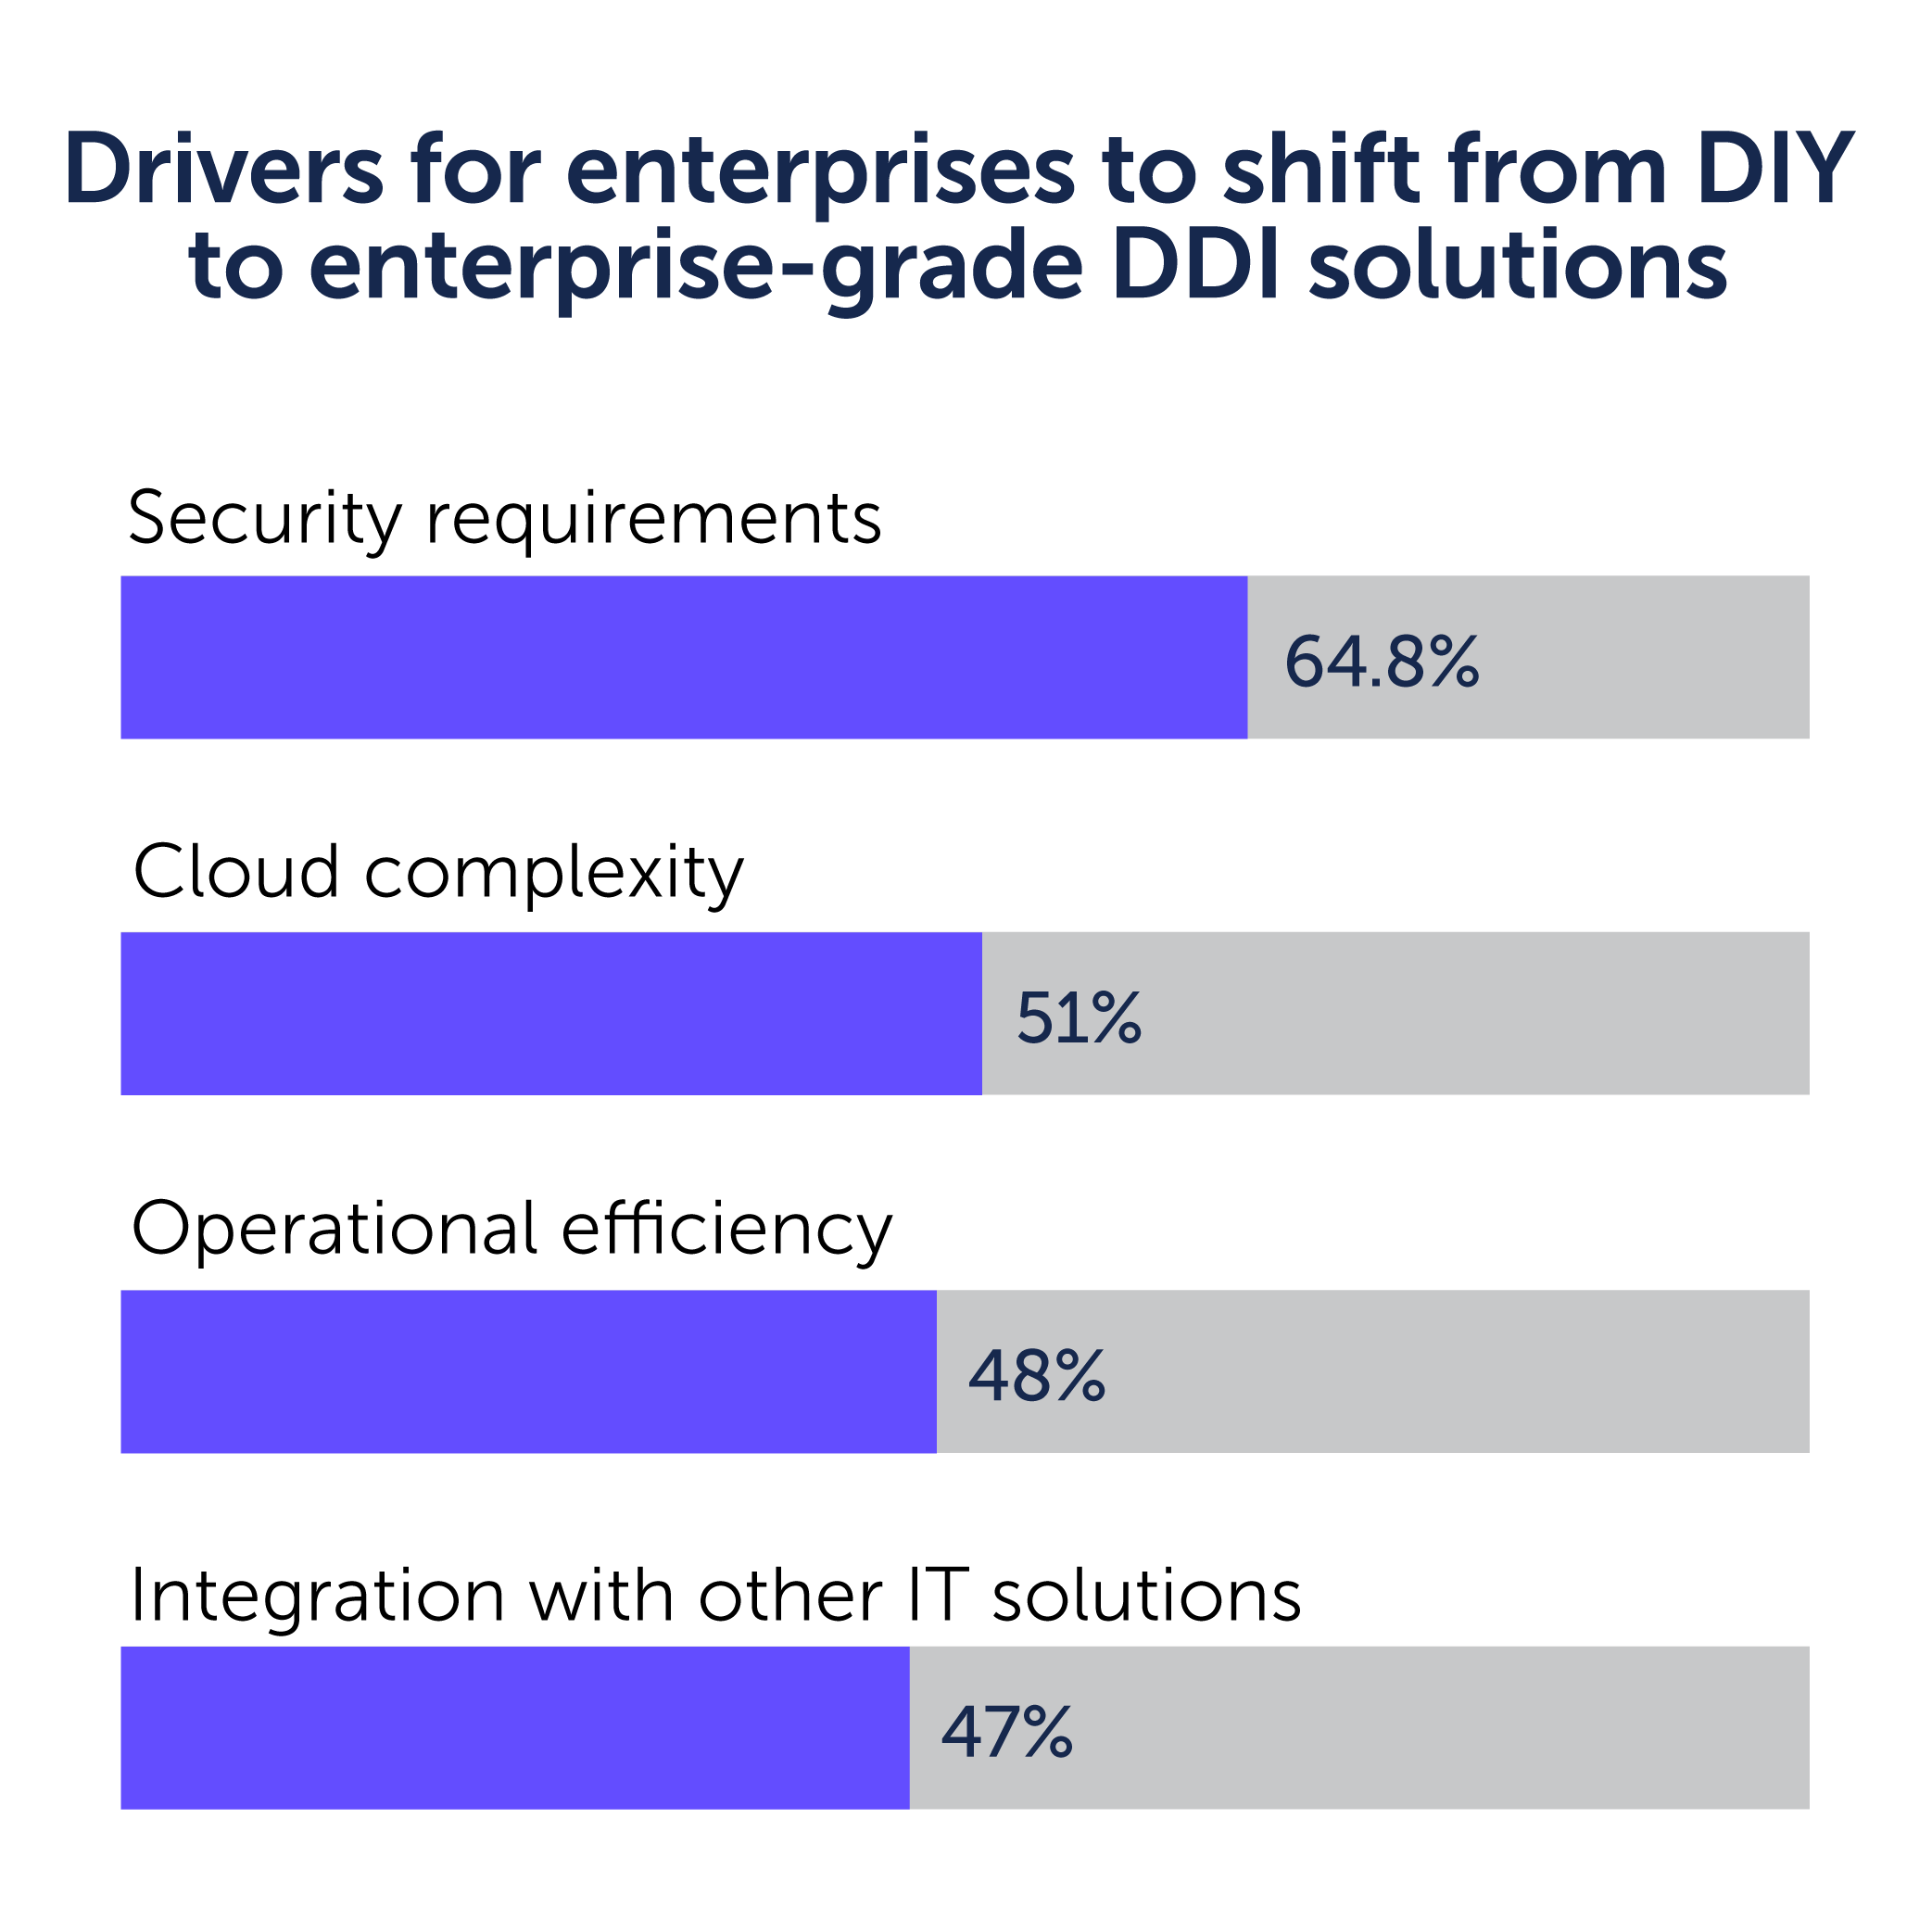 Bar graph of four drivers for enterprises to shift from DIY to enterprise-grade DDI solutions